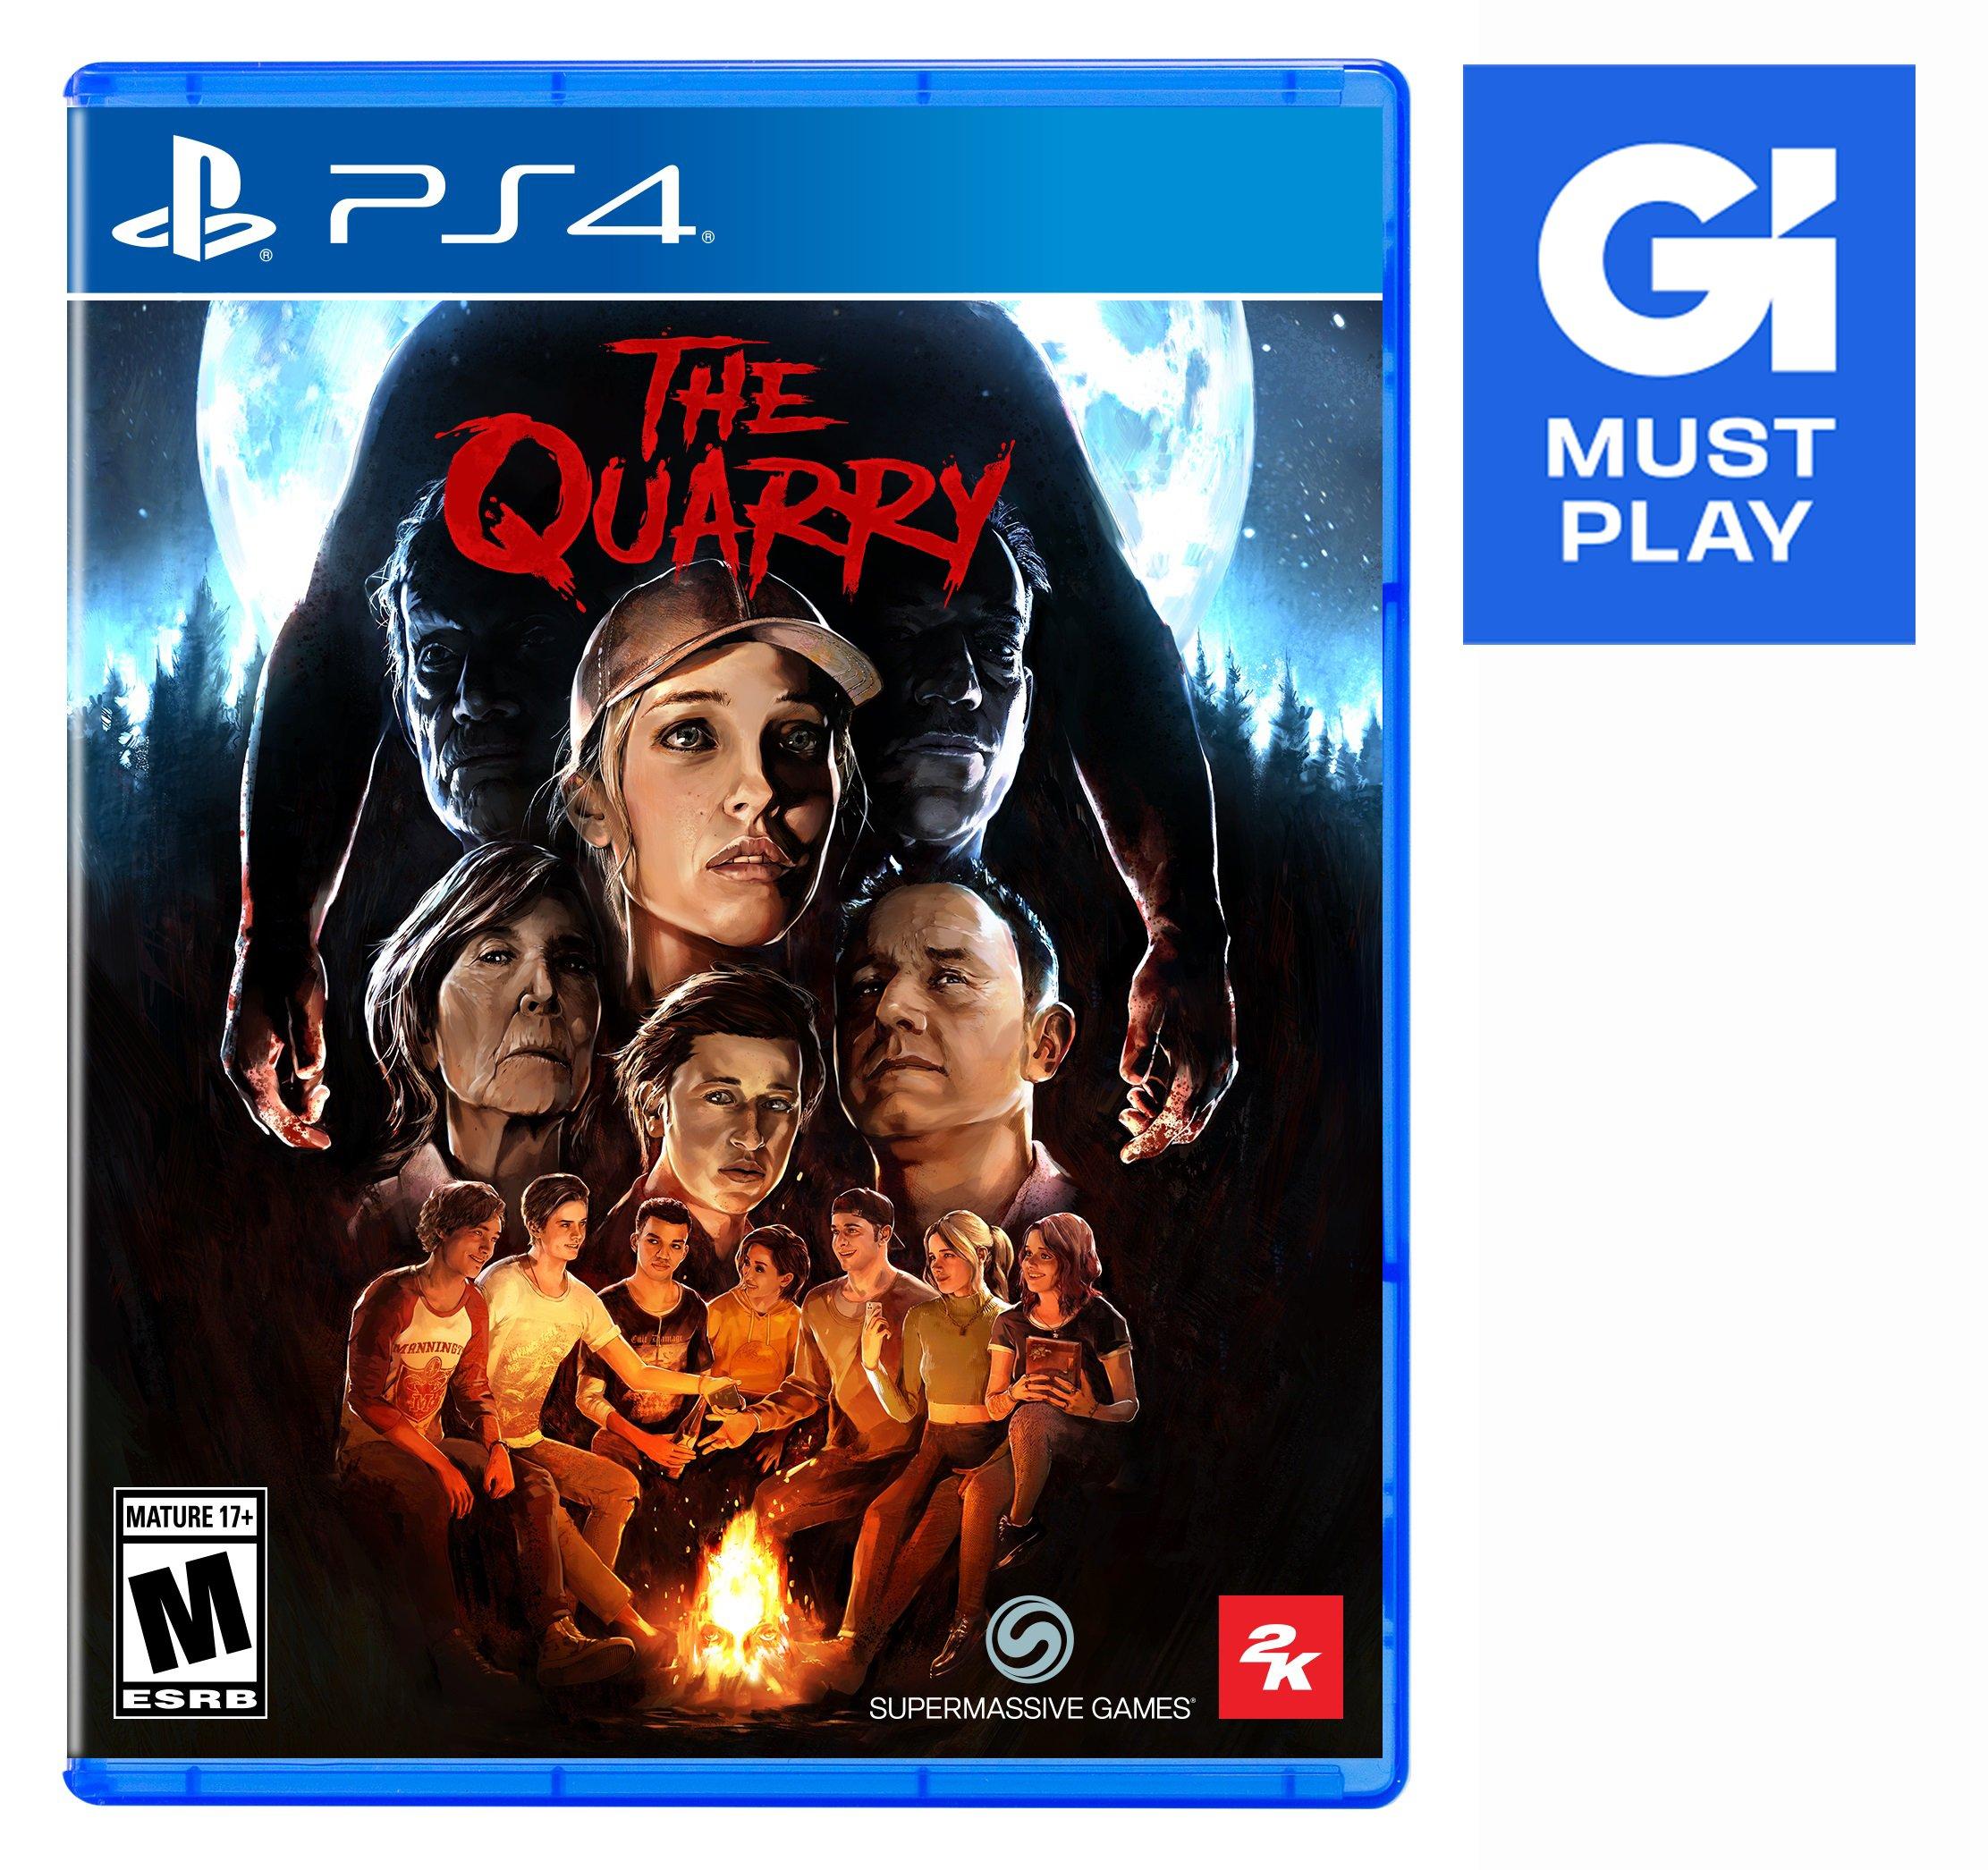 The Quarry - PlayStation 4 (2K Games), New - GameStop